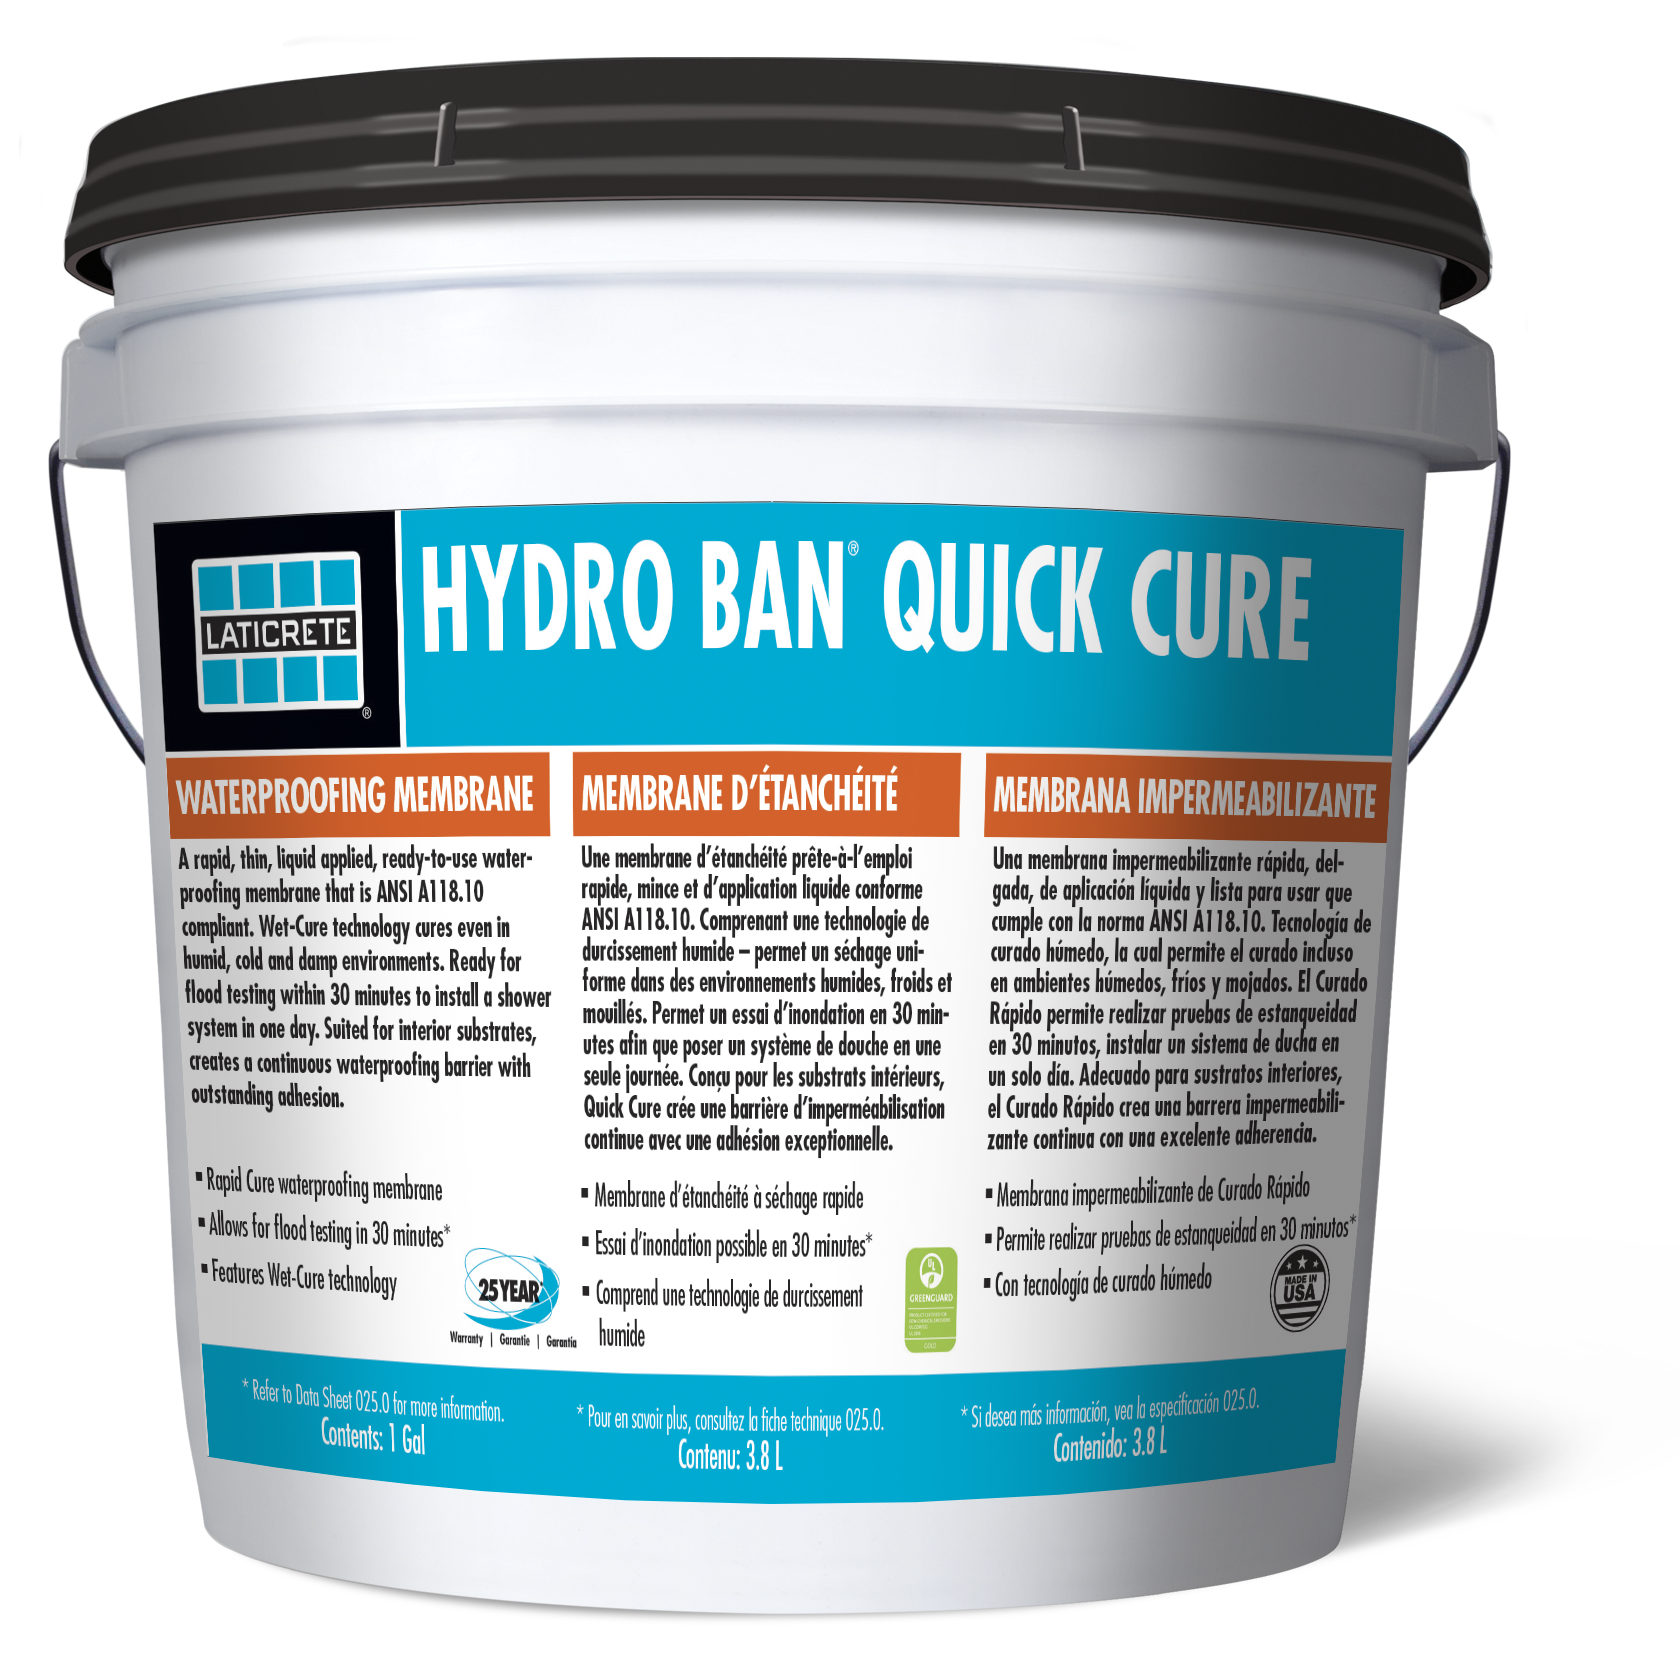 HYDRO BAN® Quick Cure